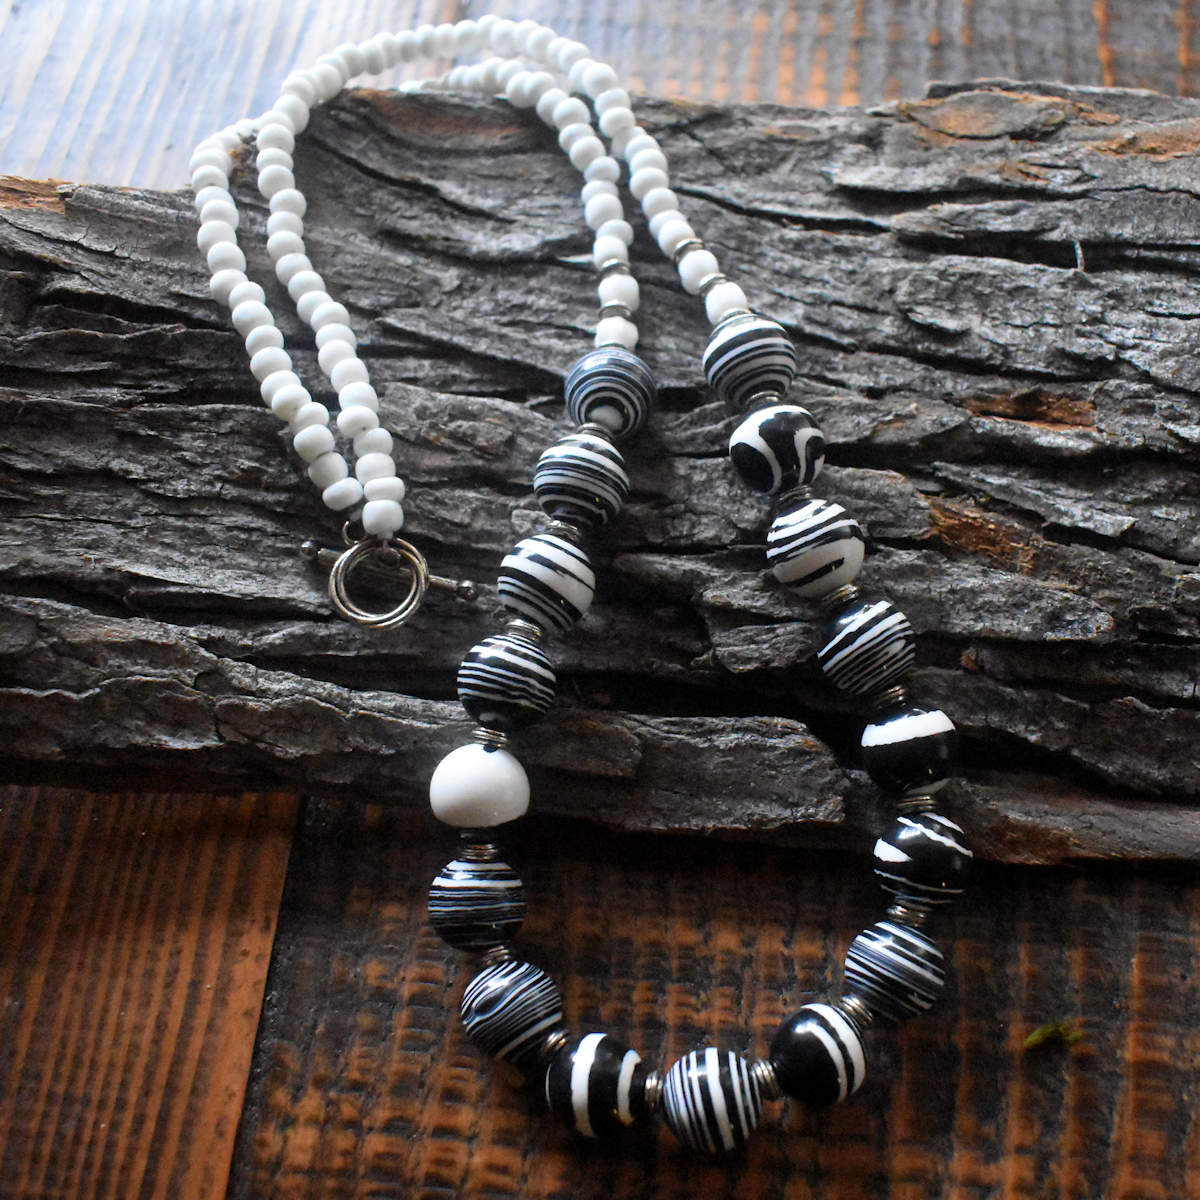 A beaded necklace with larger black and white swirl beads at the front and large, slightly irregular white seed beads at the back is draped over a wood background. The necklace is finished with a silver toggle clasp..